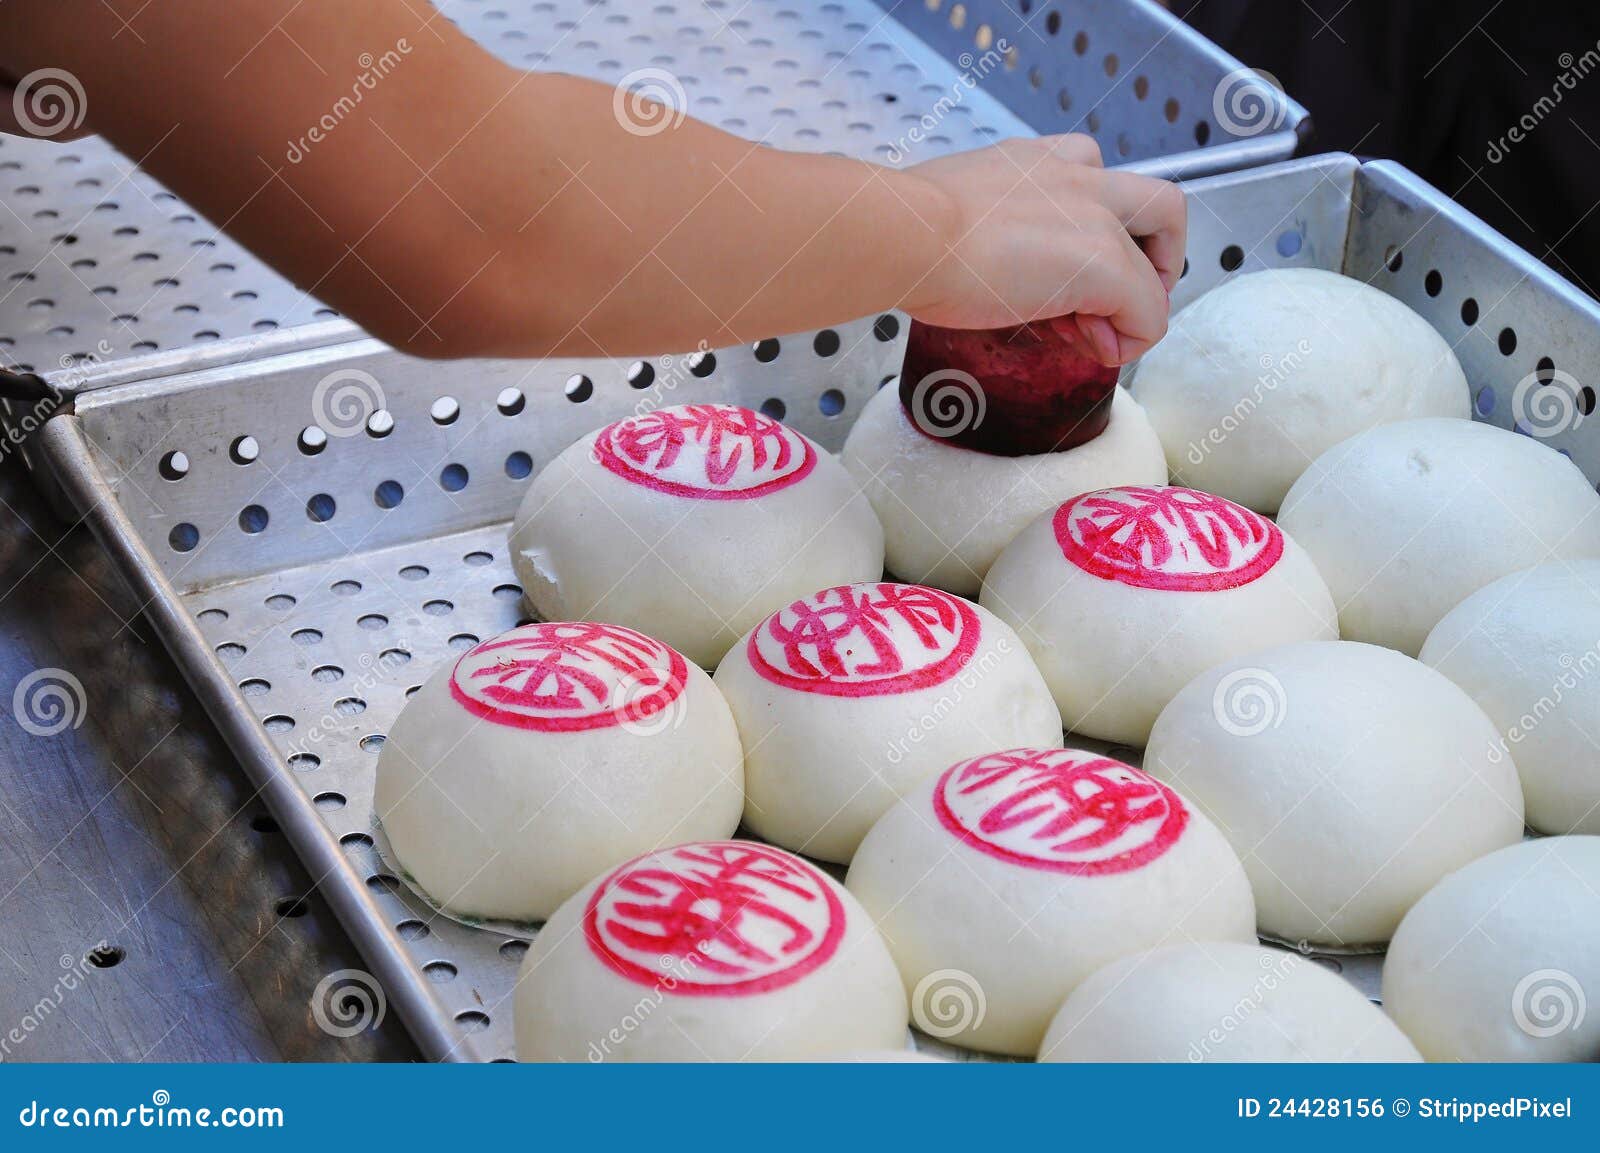 traditional steamed buns, cheung chau